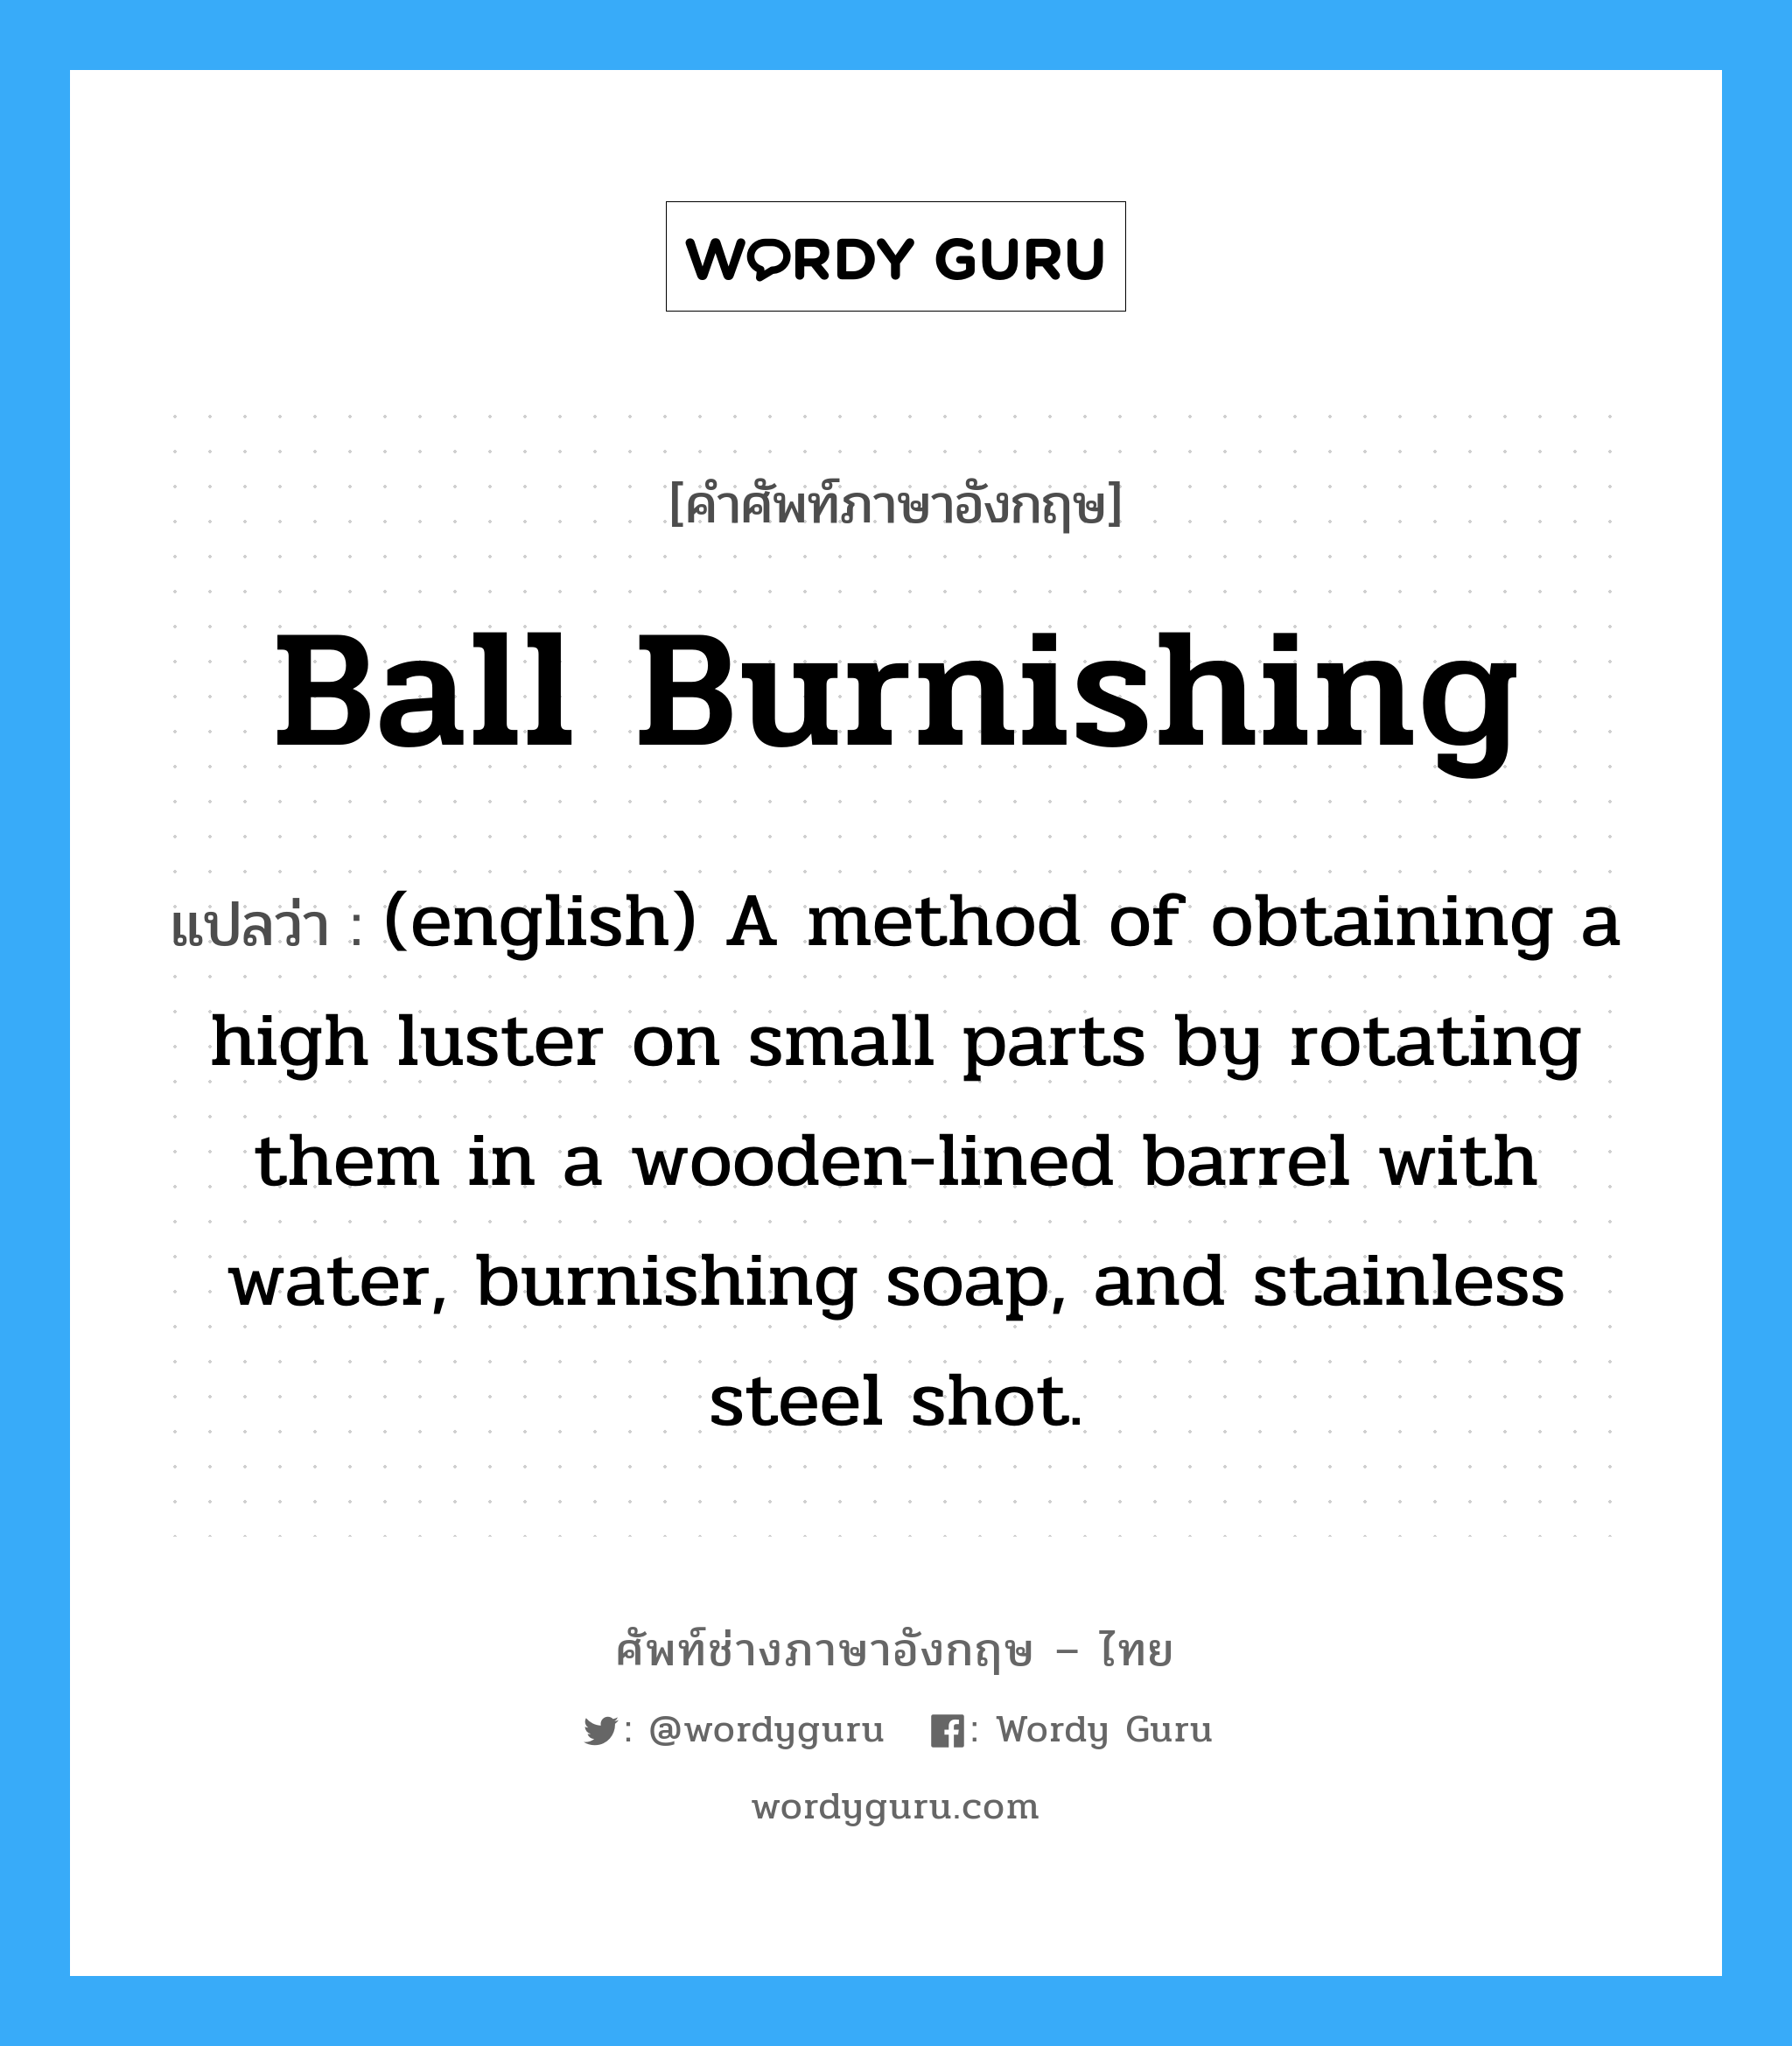 Ball Burnishing แปลว่า?, คำศัพท์ช่างภาษาอังกฤษ - ไทย Ball Burnishing คำศัพท์ภาษาอังกฤษ Ball Burnishing แปลว่า (english) A method of obtaining a high luster on small parts by rotating them in a wooden-lined barrel with water, burnishing soap, and stainless steel shot.